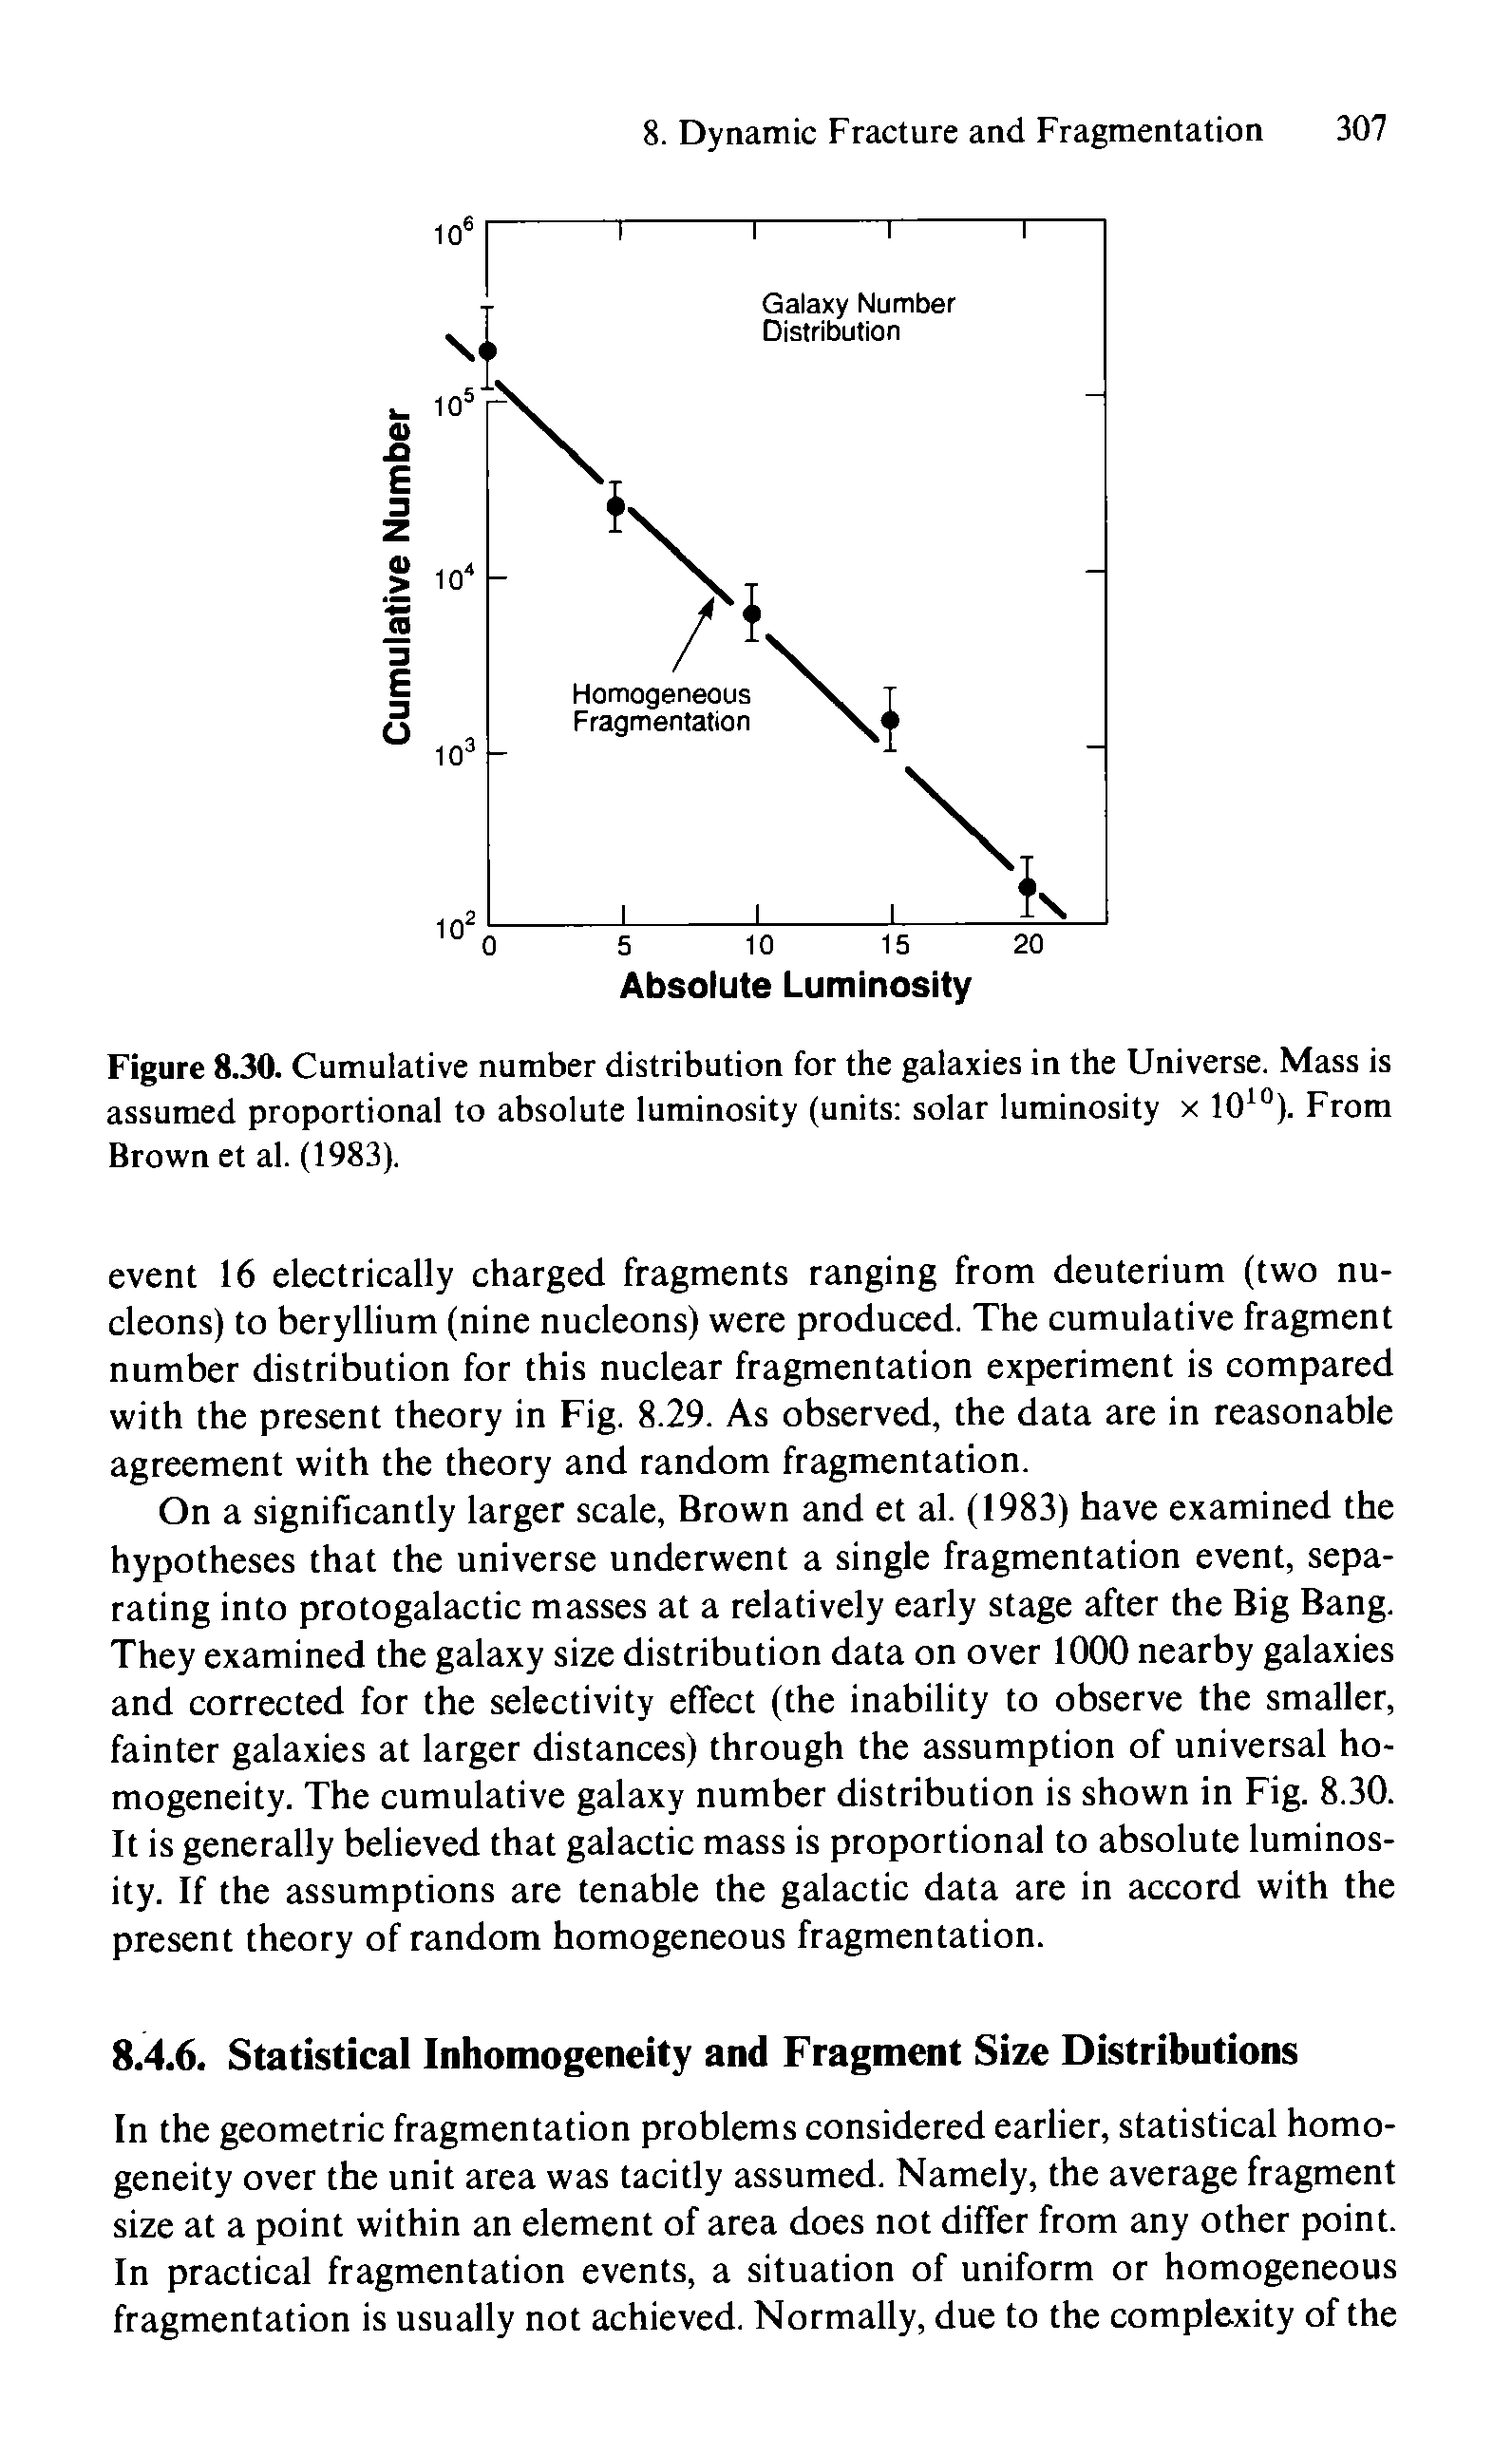 Figure 8.30. Cumulative number distribution for the galaxies in the Universe. Mass is assumed proportional to absolute luminosity (units solar luminosity x 10 ). From Brown et al. (1983).